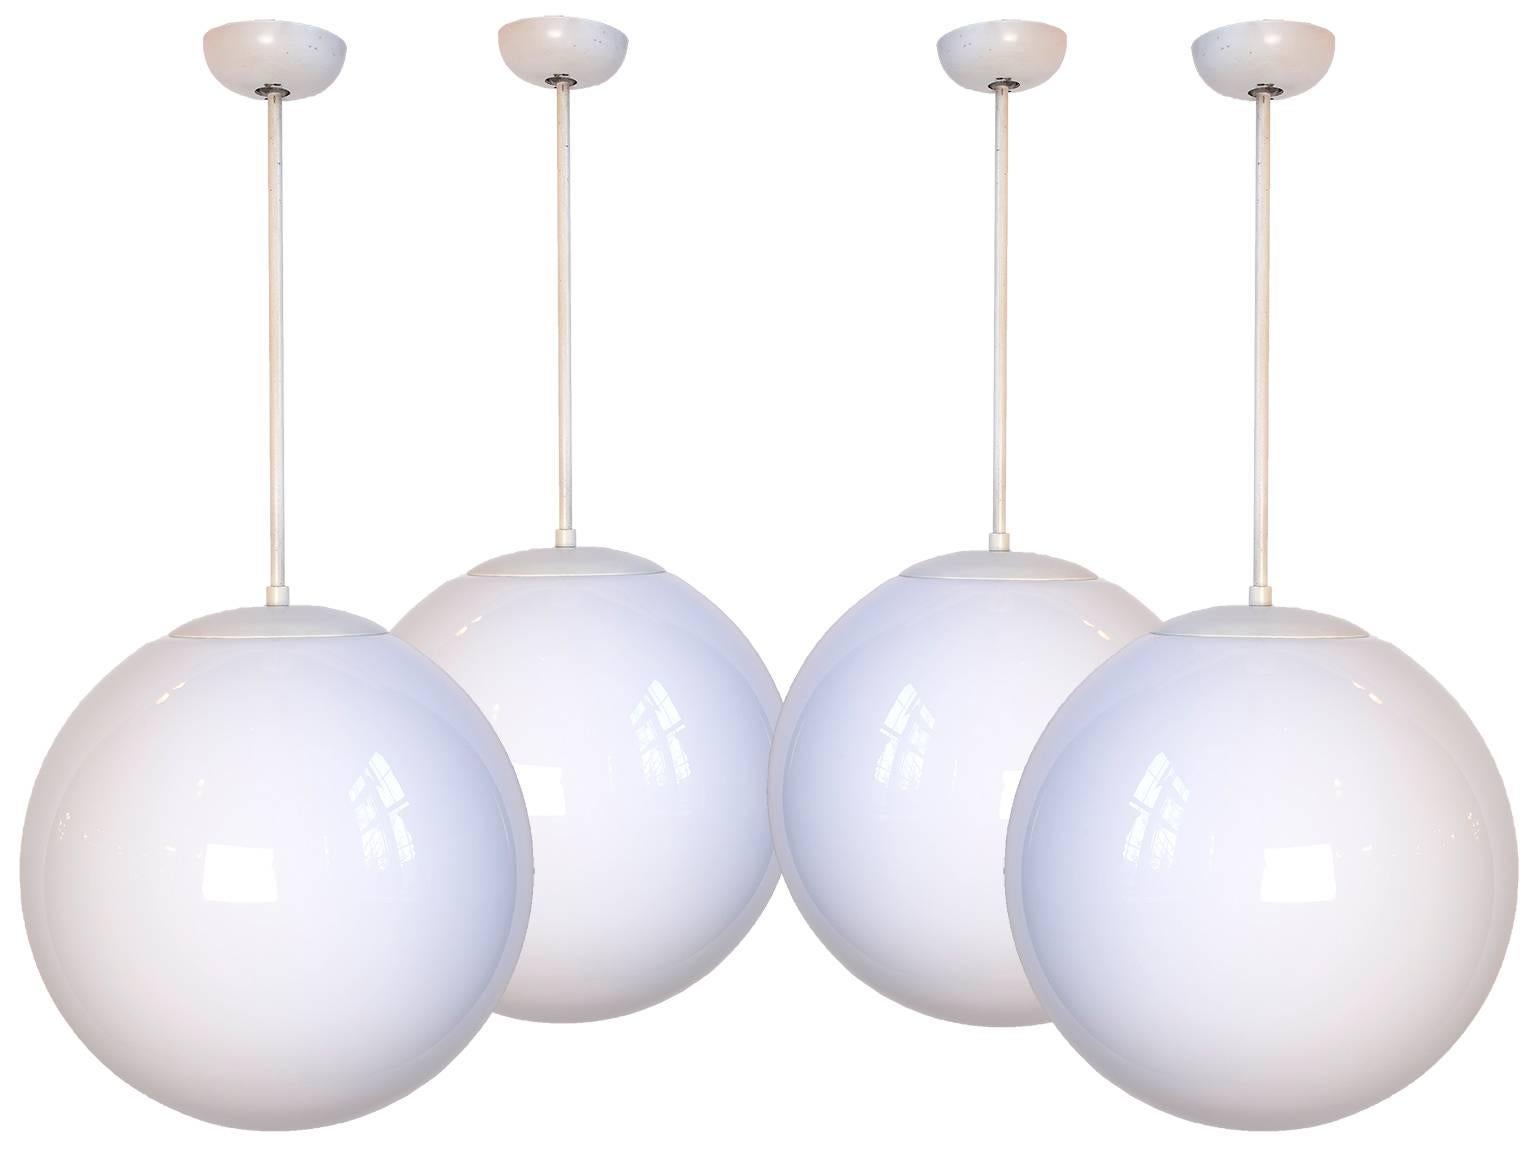 These fixtures are a streamlined and clean look from the, early 1960s. Each fixture includes a milk glass spherical globe with an original pole pendant, fitter, and canopy. These globes are the smaller of two different sizes. They look great hanging